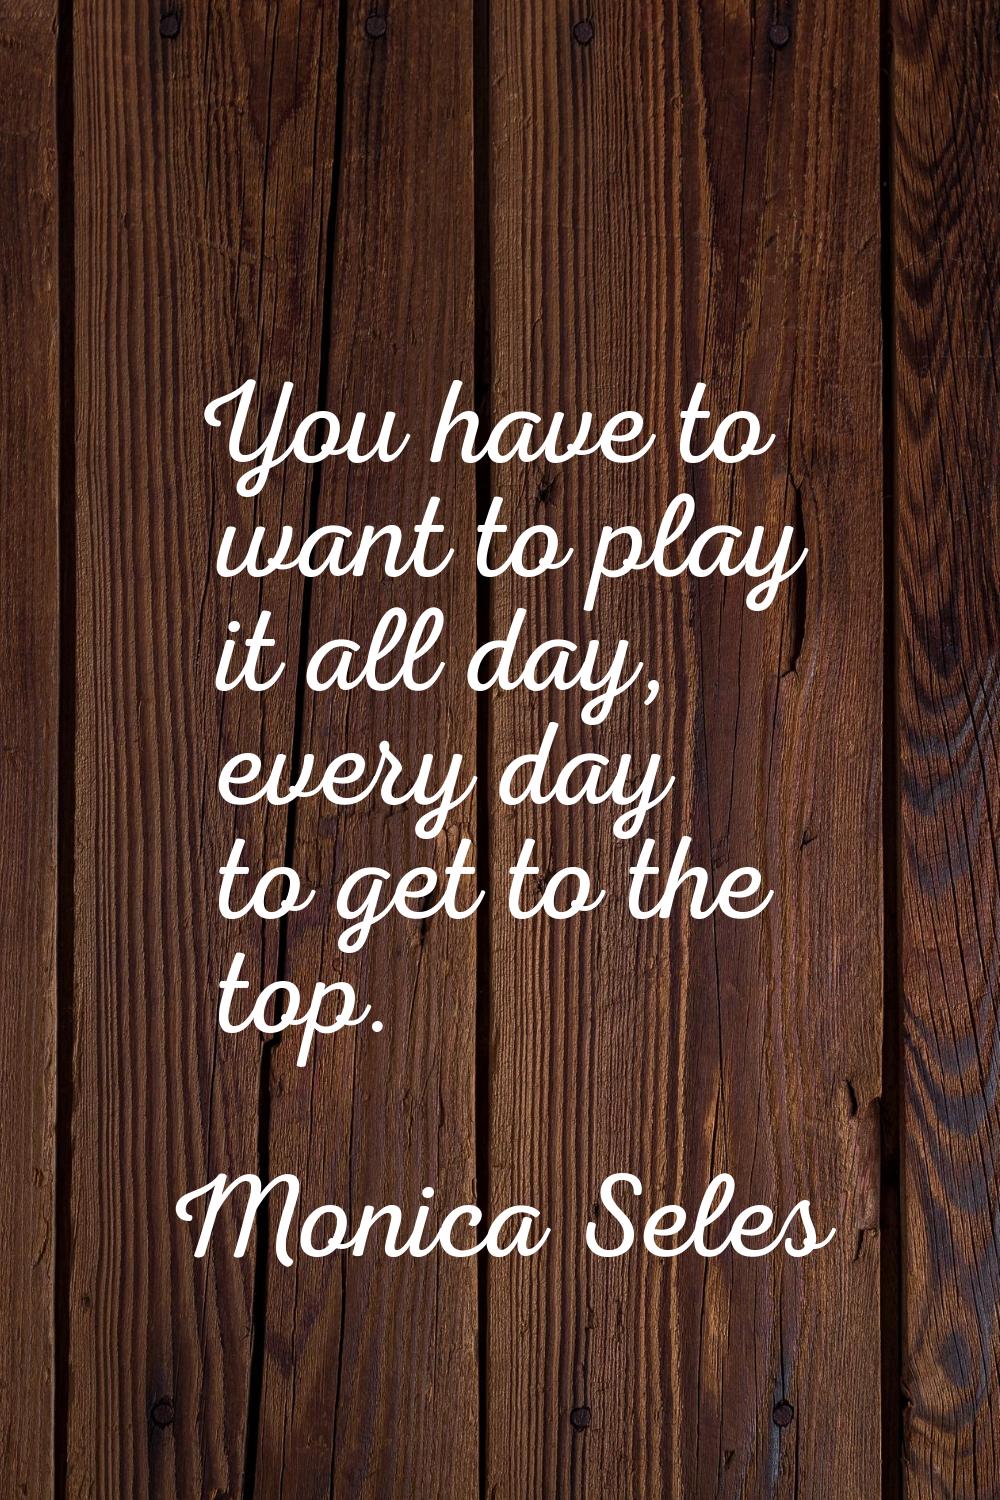 You have to want to play it all day, every day to get to the top.